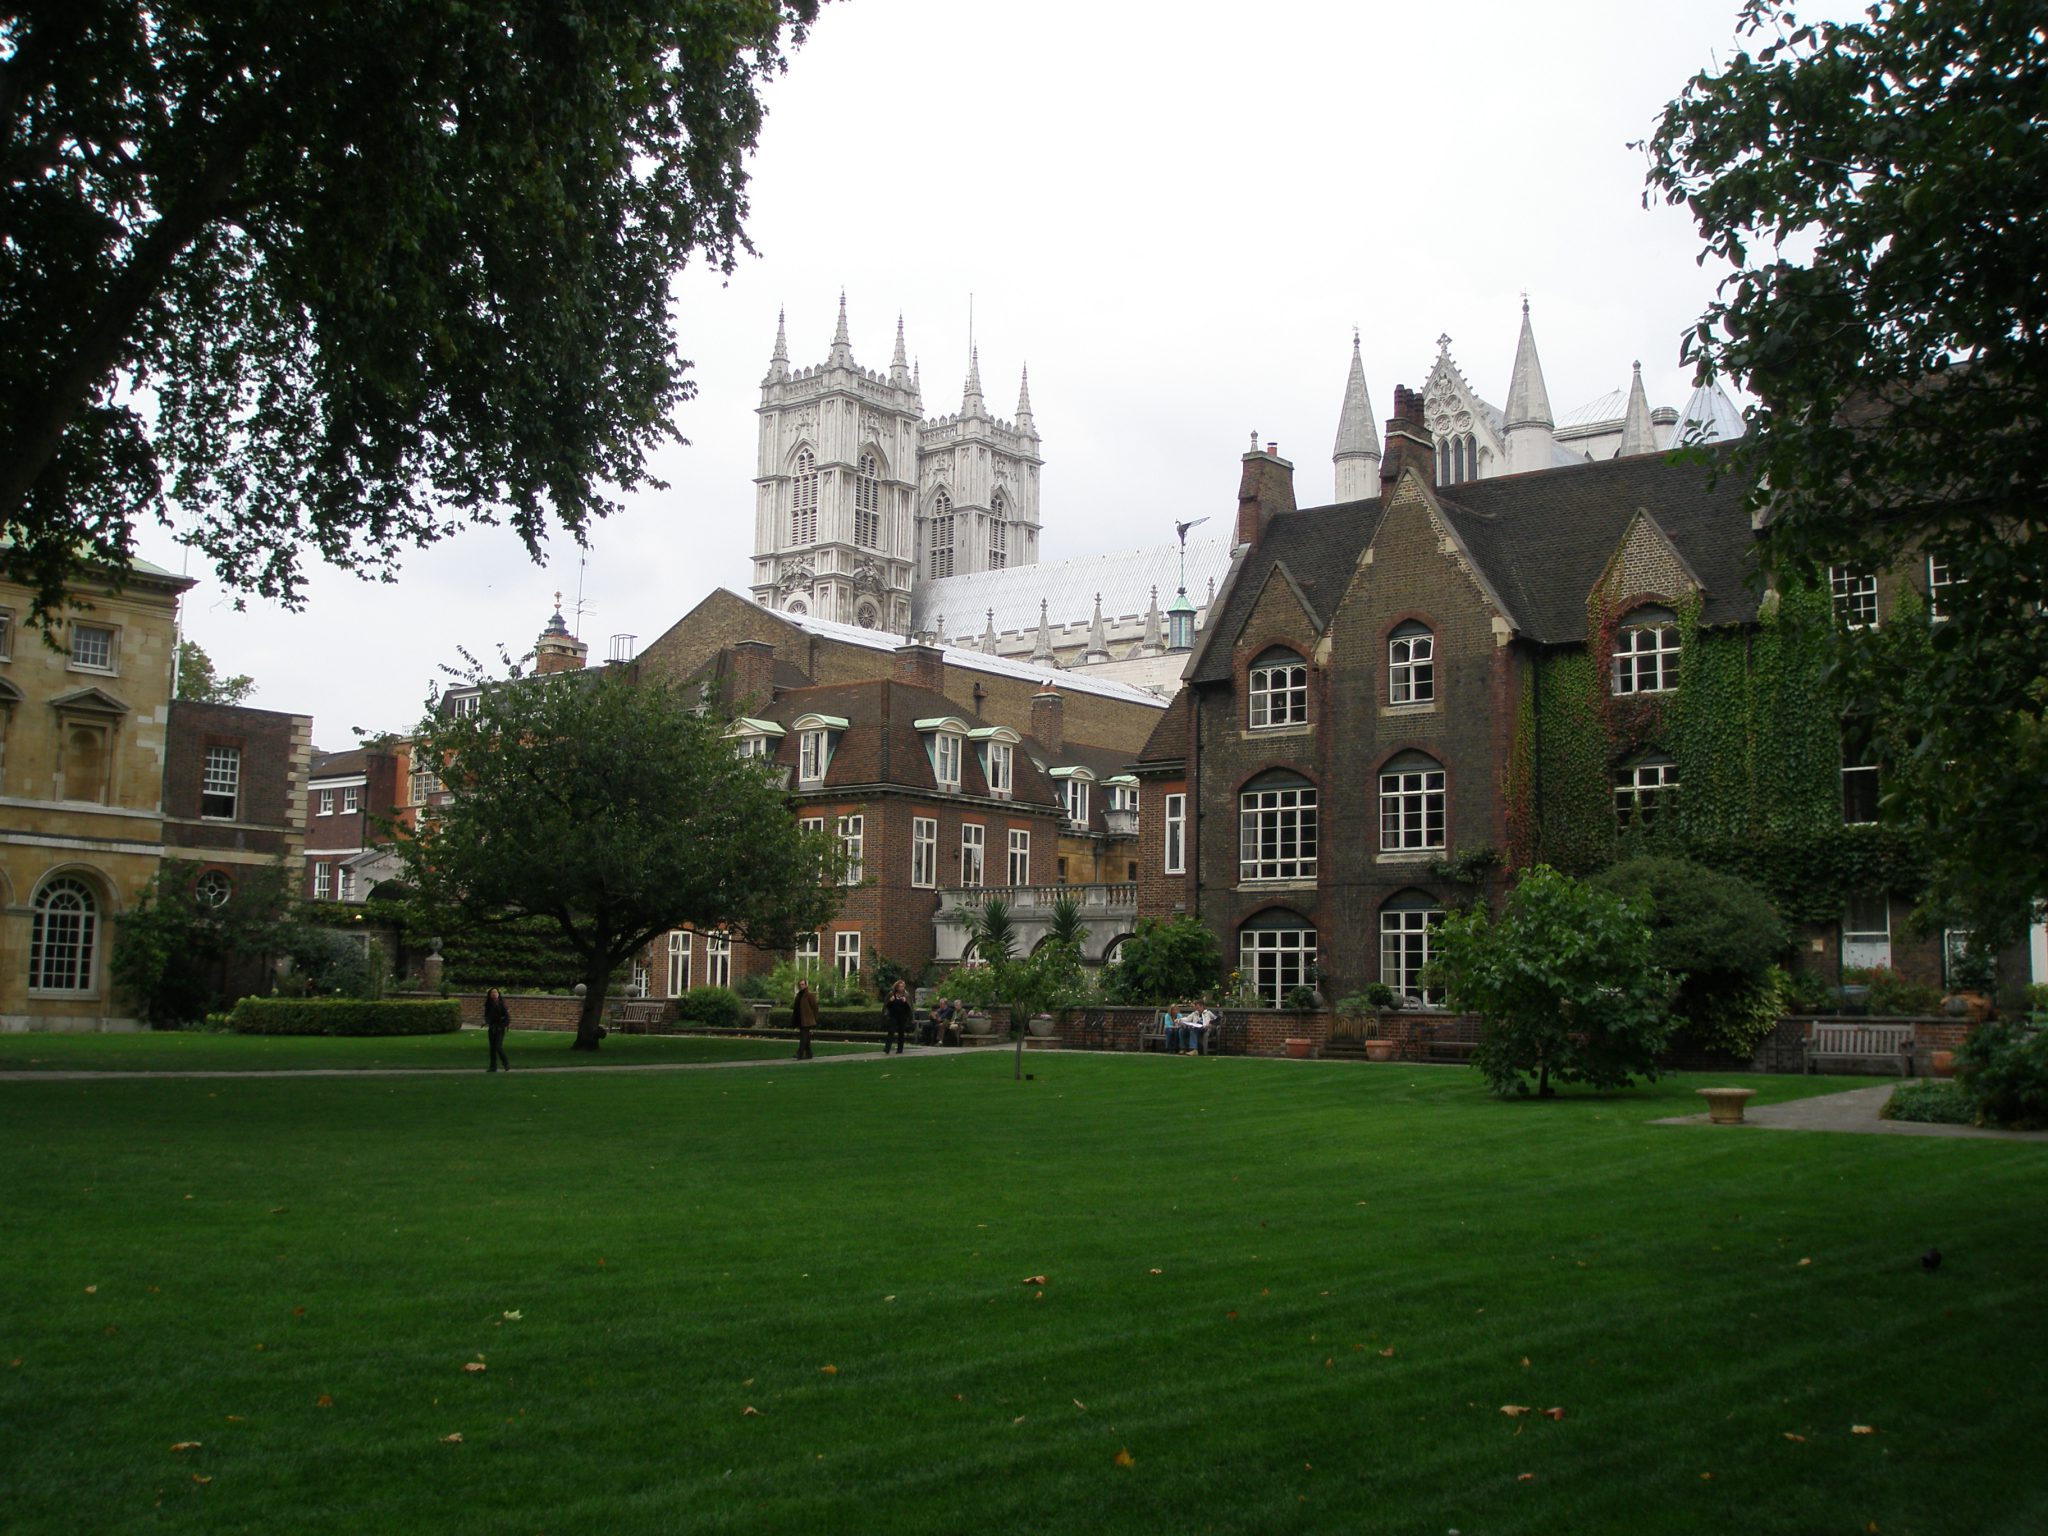 Westminster Abbey's College Garden, which is still used to grow medicinal herbs